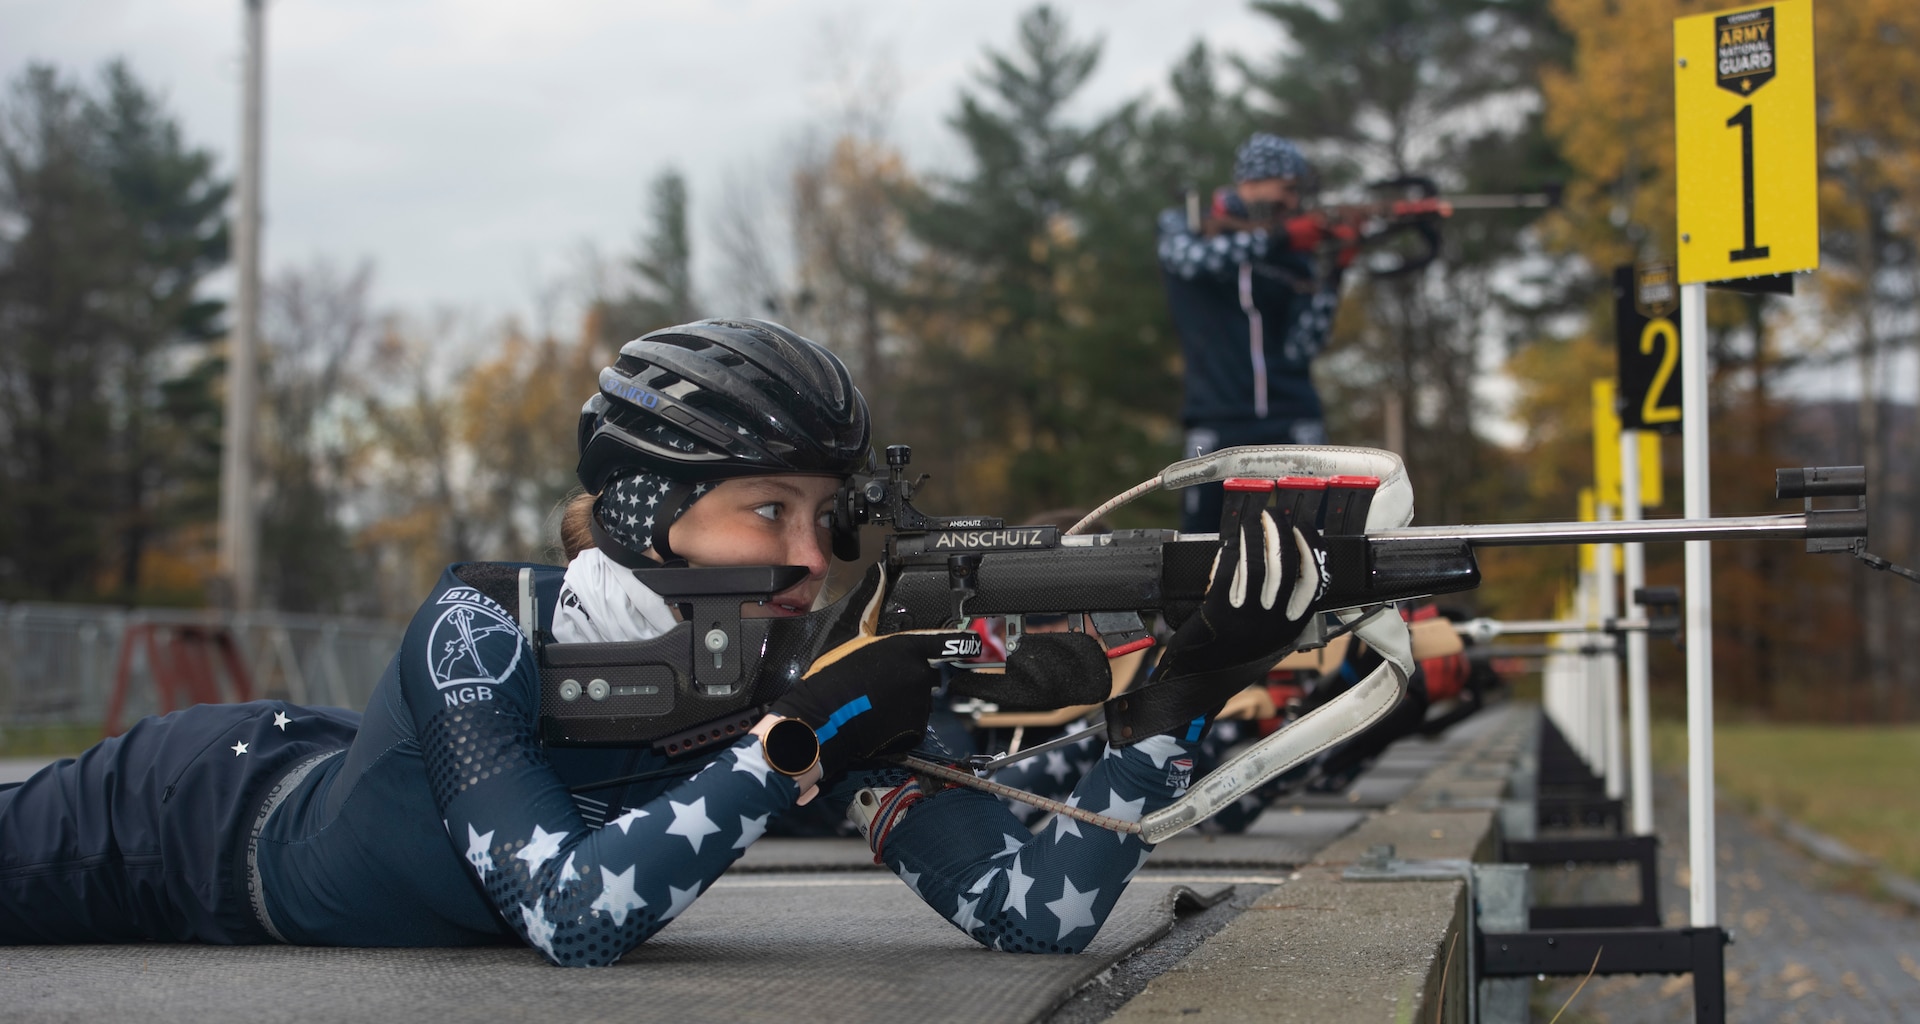 Pvt. Lina Farra, a human resources speciialist with the Law and Order Detachment, Garrison Support Command, Vermont Army National Guard, dry fires a Biathlon rifle during practice at the Camp Ethan Allen Training Site in Jericho, Vermont, on Nov. 2, 2021. Farra, a native of Heber City, Utah, competed in the 2019 and 2020 International Biathlon Union Youth/Junior world championships. (U.S. Army National Guard photo by Don Branum)